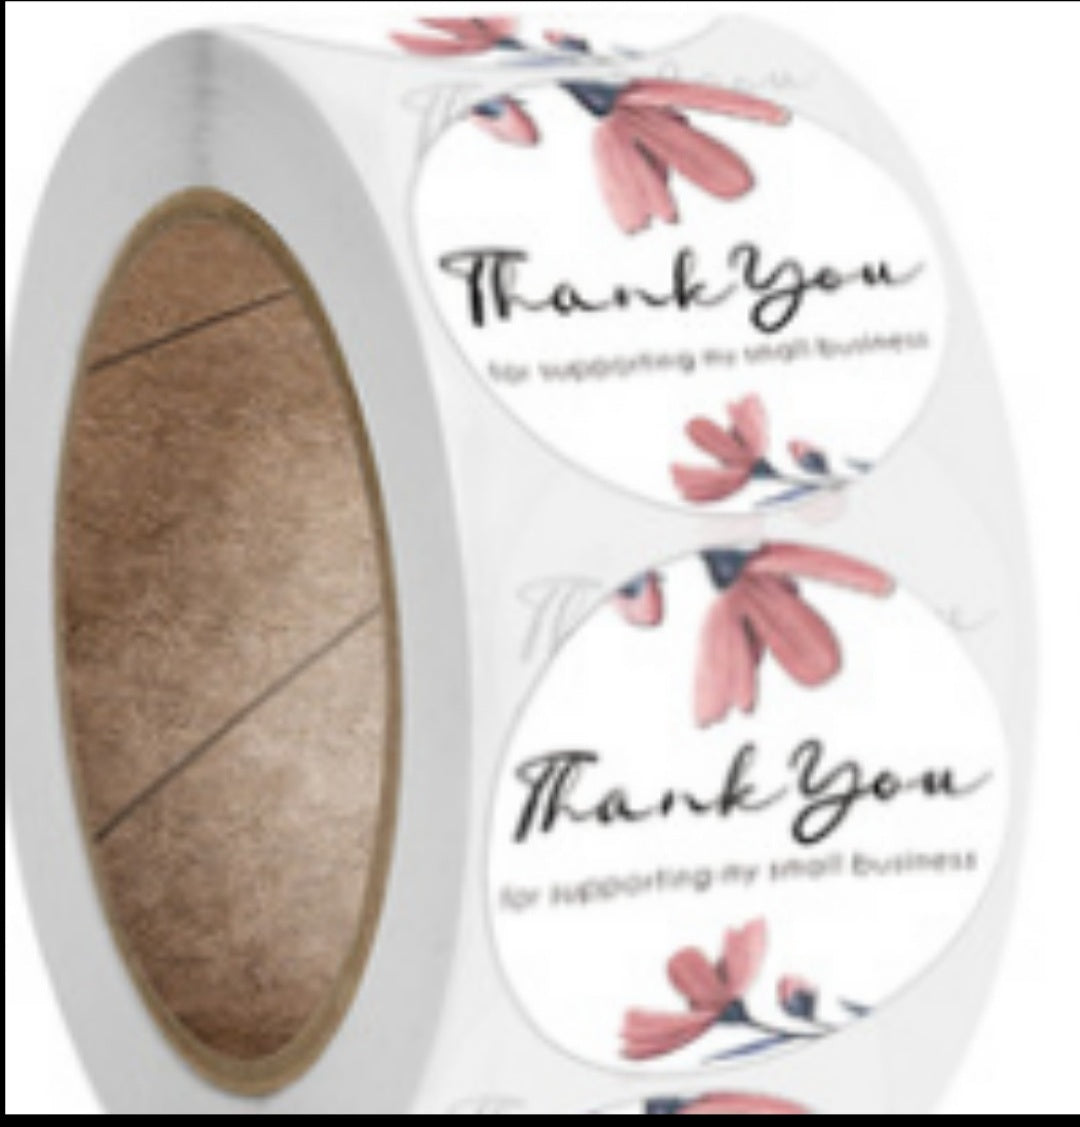 1 In Thank you Stickers